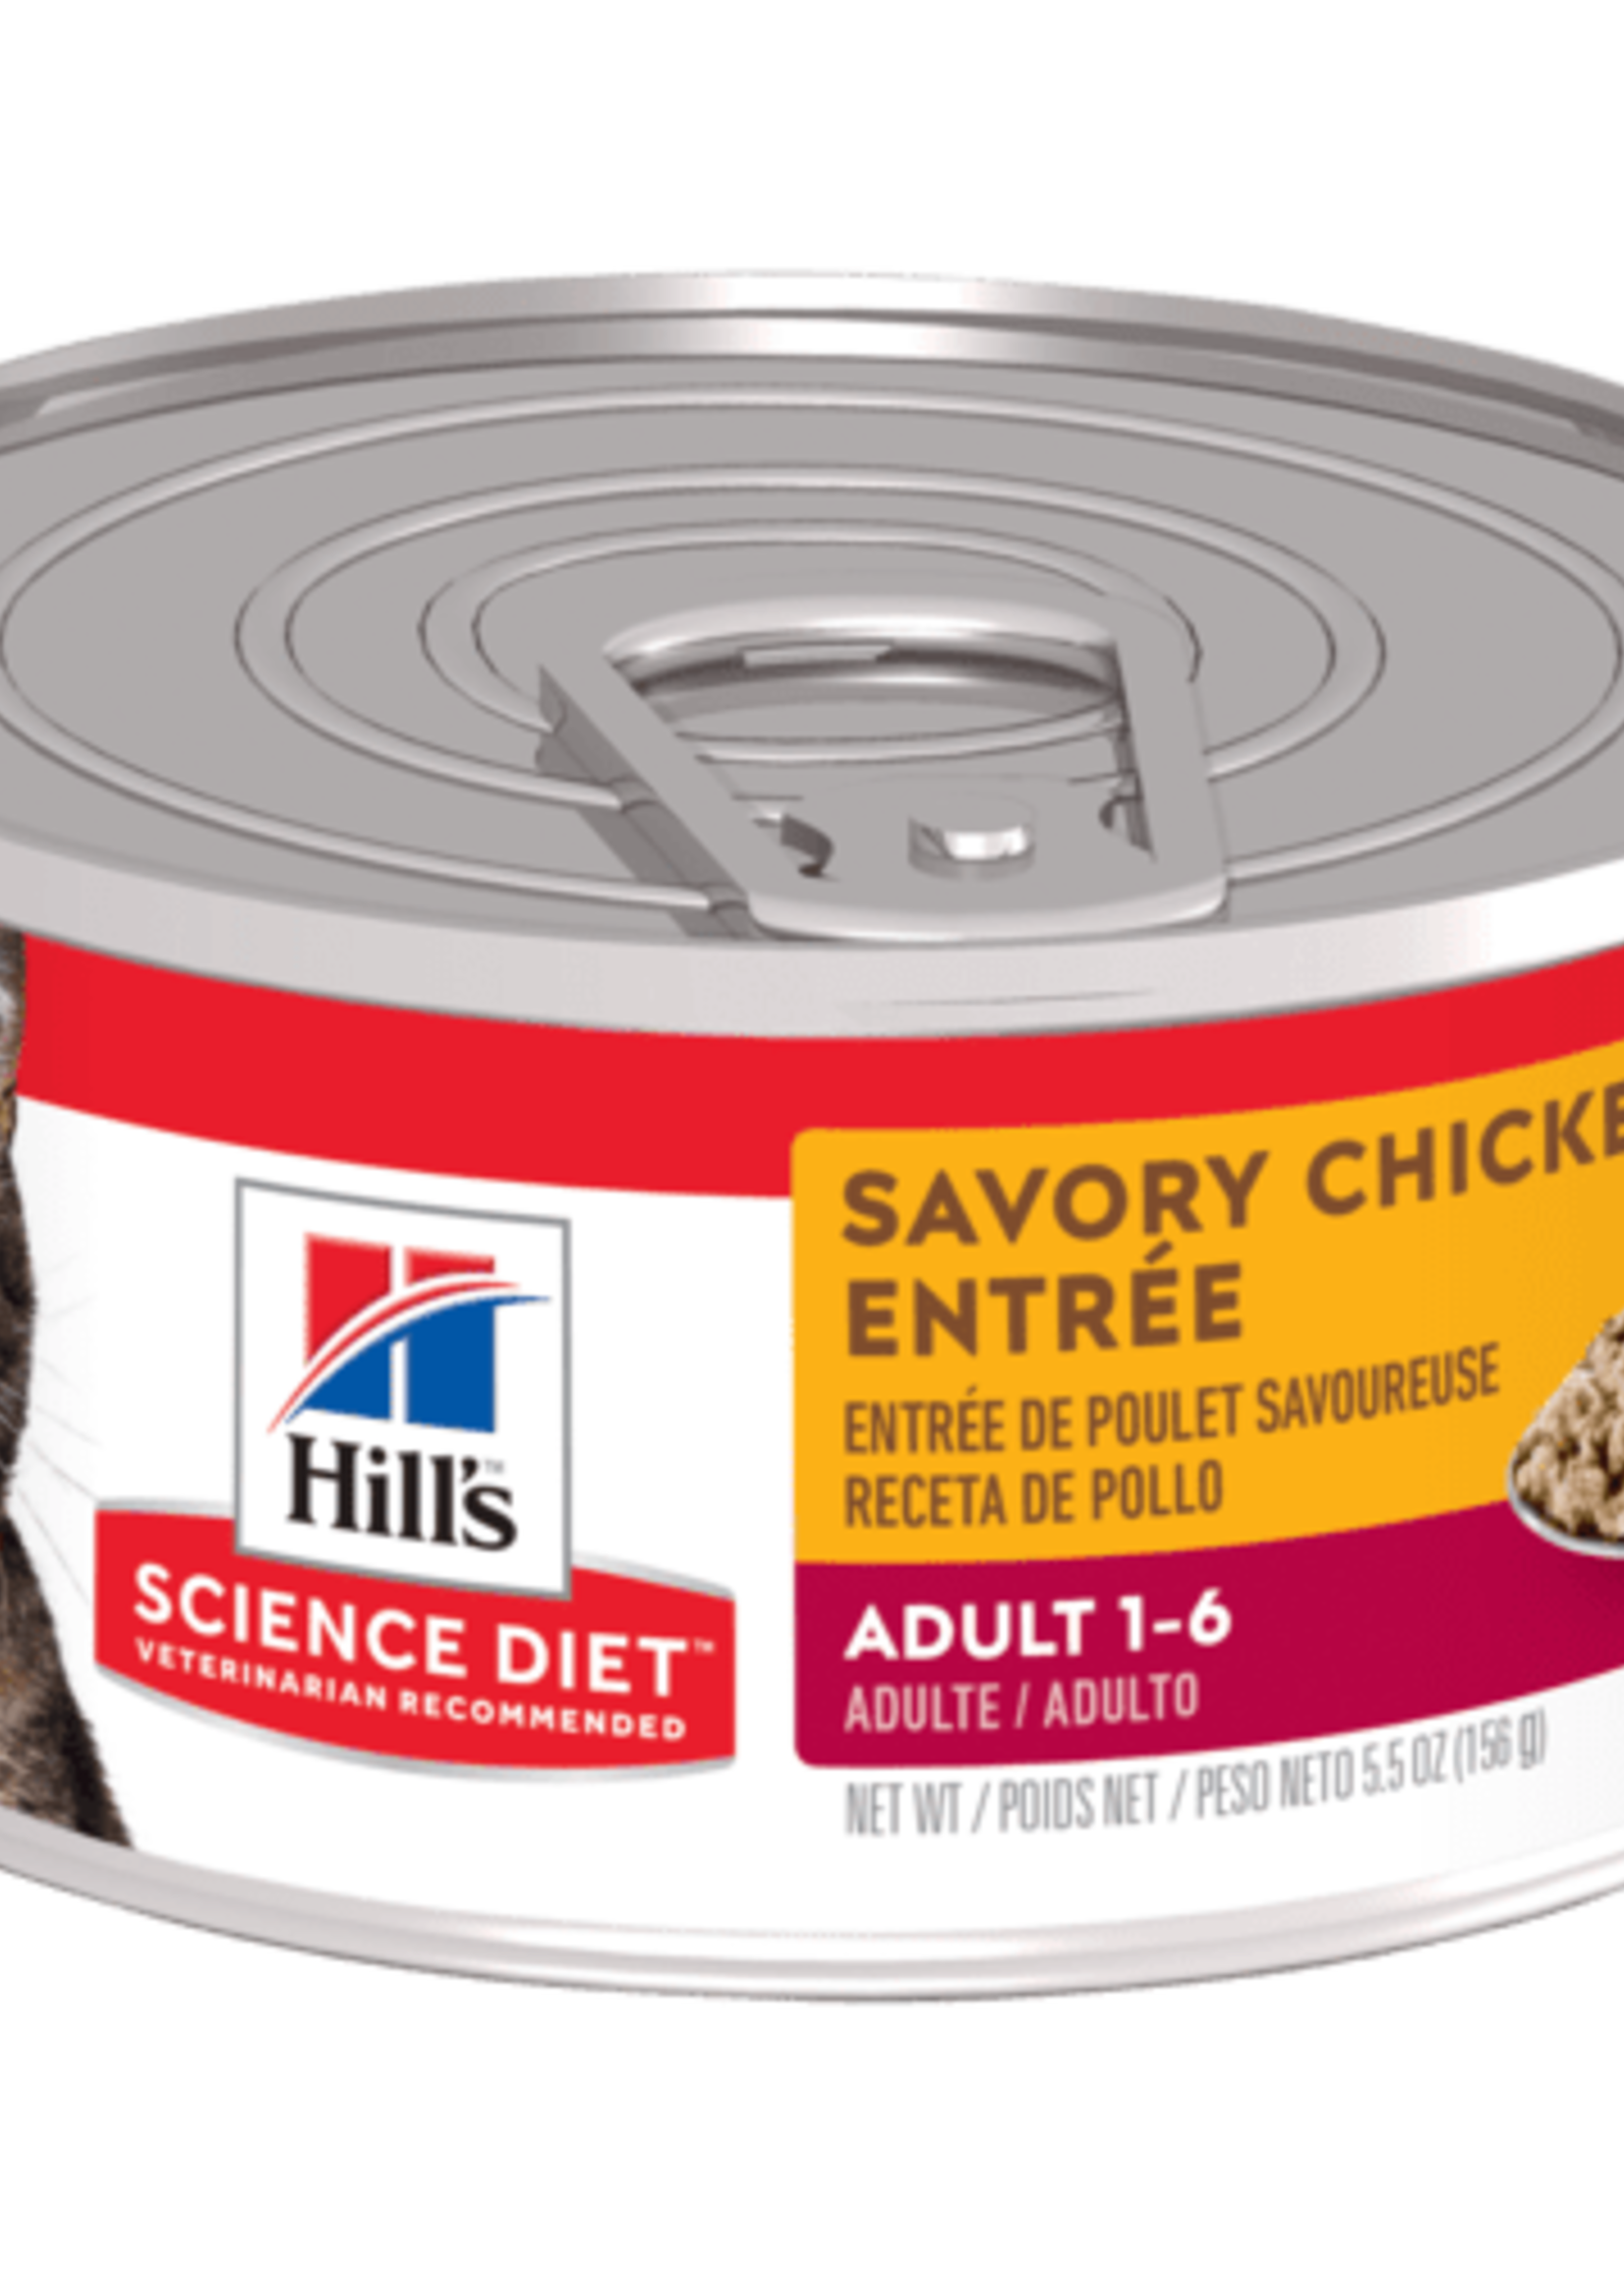 Hill's Science Diet Hill's Science Diet Feline Can Savory Chicken Entree 1-6 156g